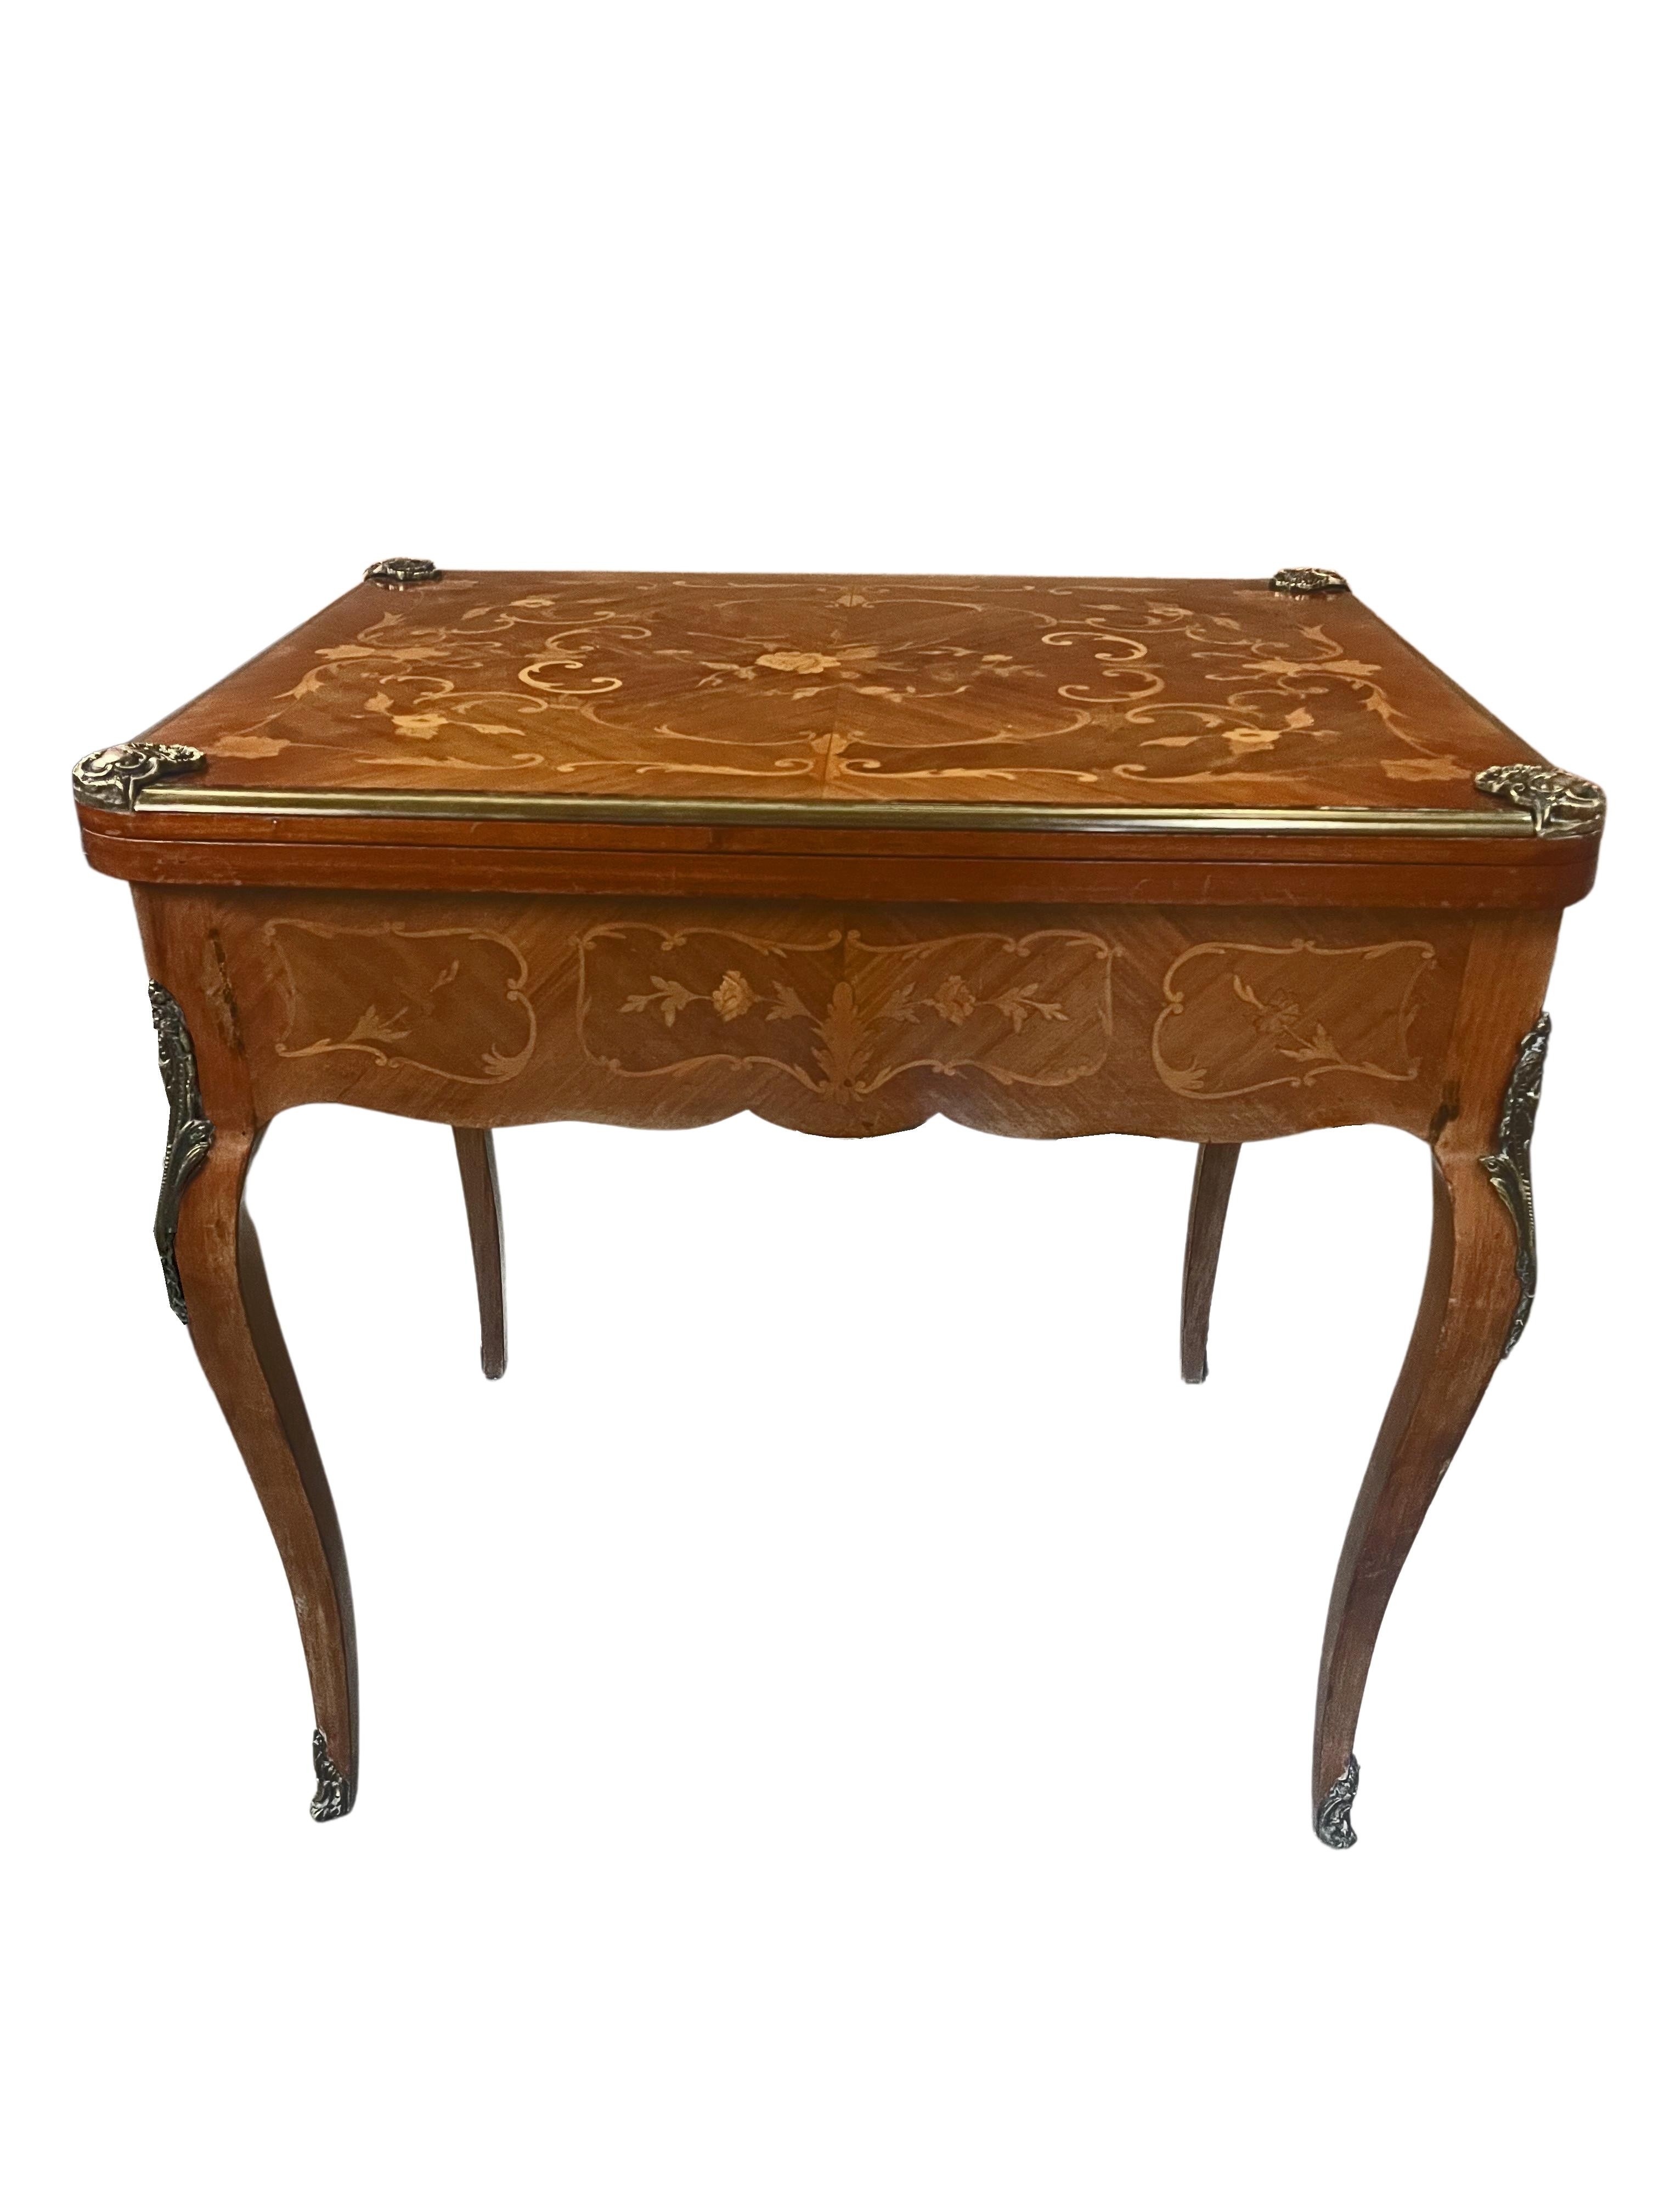 LOUIS XV STYLE INLAID GAMES TABLE 2f8b88